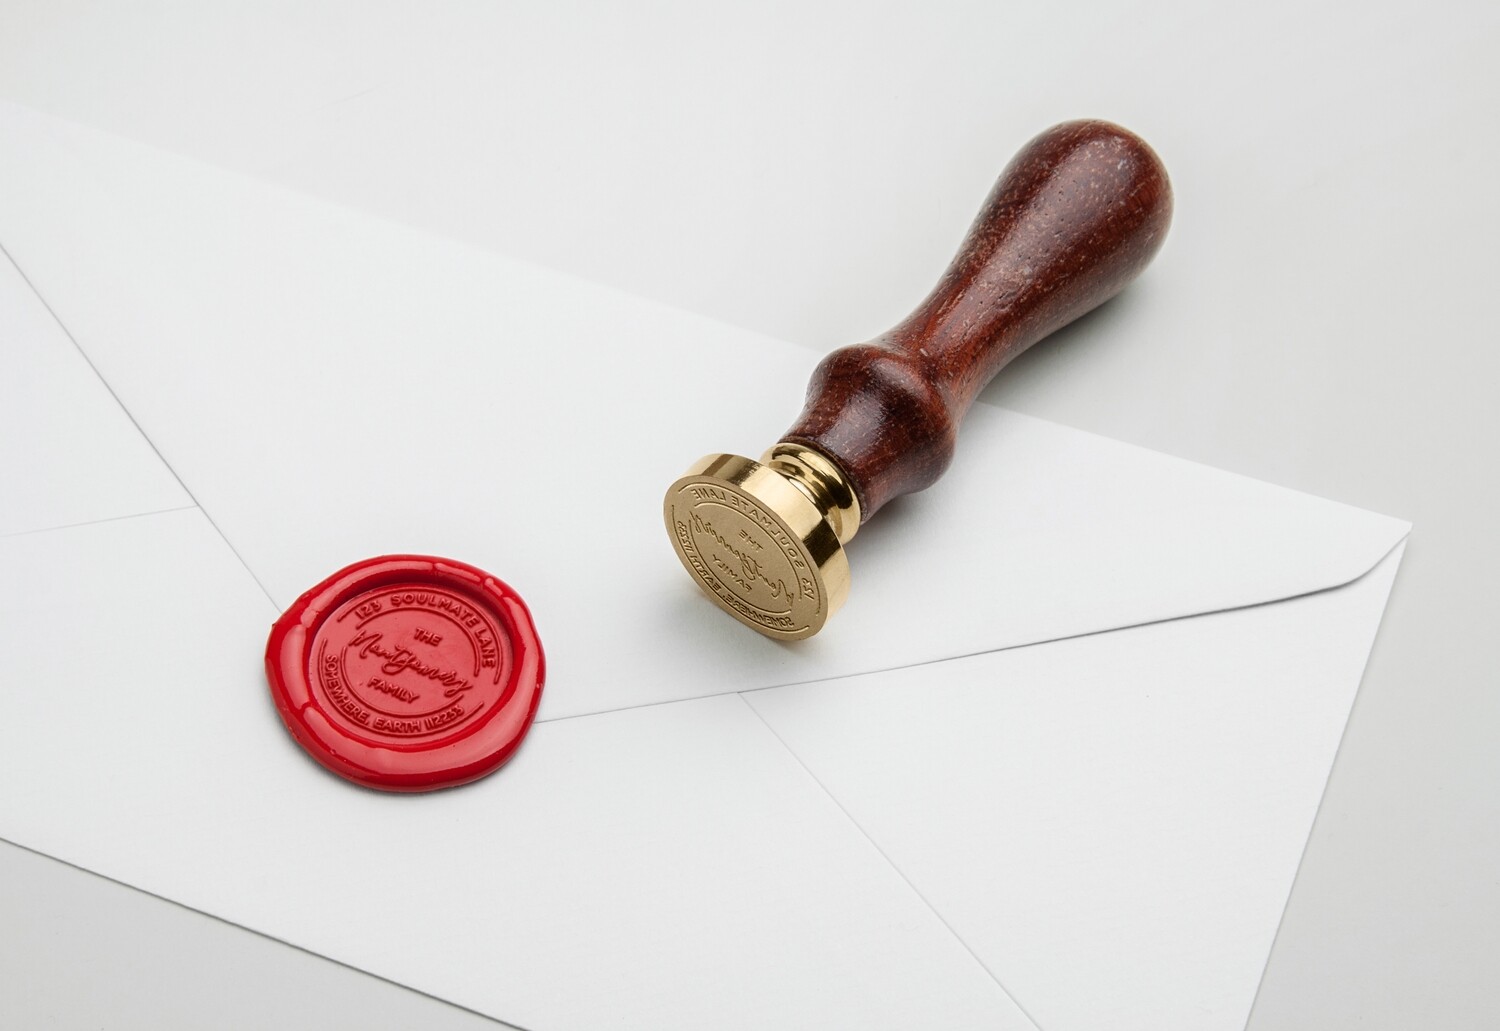 Custom  Sealing Wax Seal Stamp, Personalized Metal Stamp-Wax Seal Stamp logo Personalized image custom sealing wax sealing stamp  Custom Business Logo